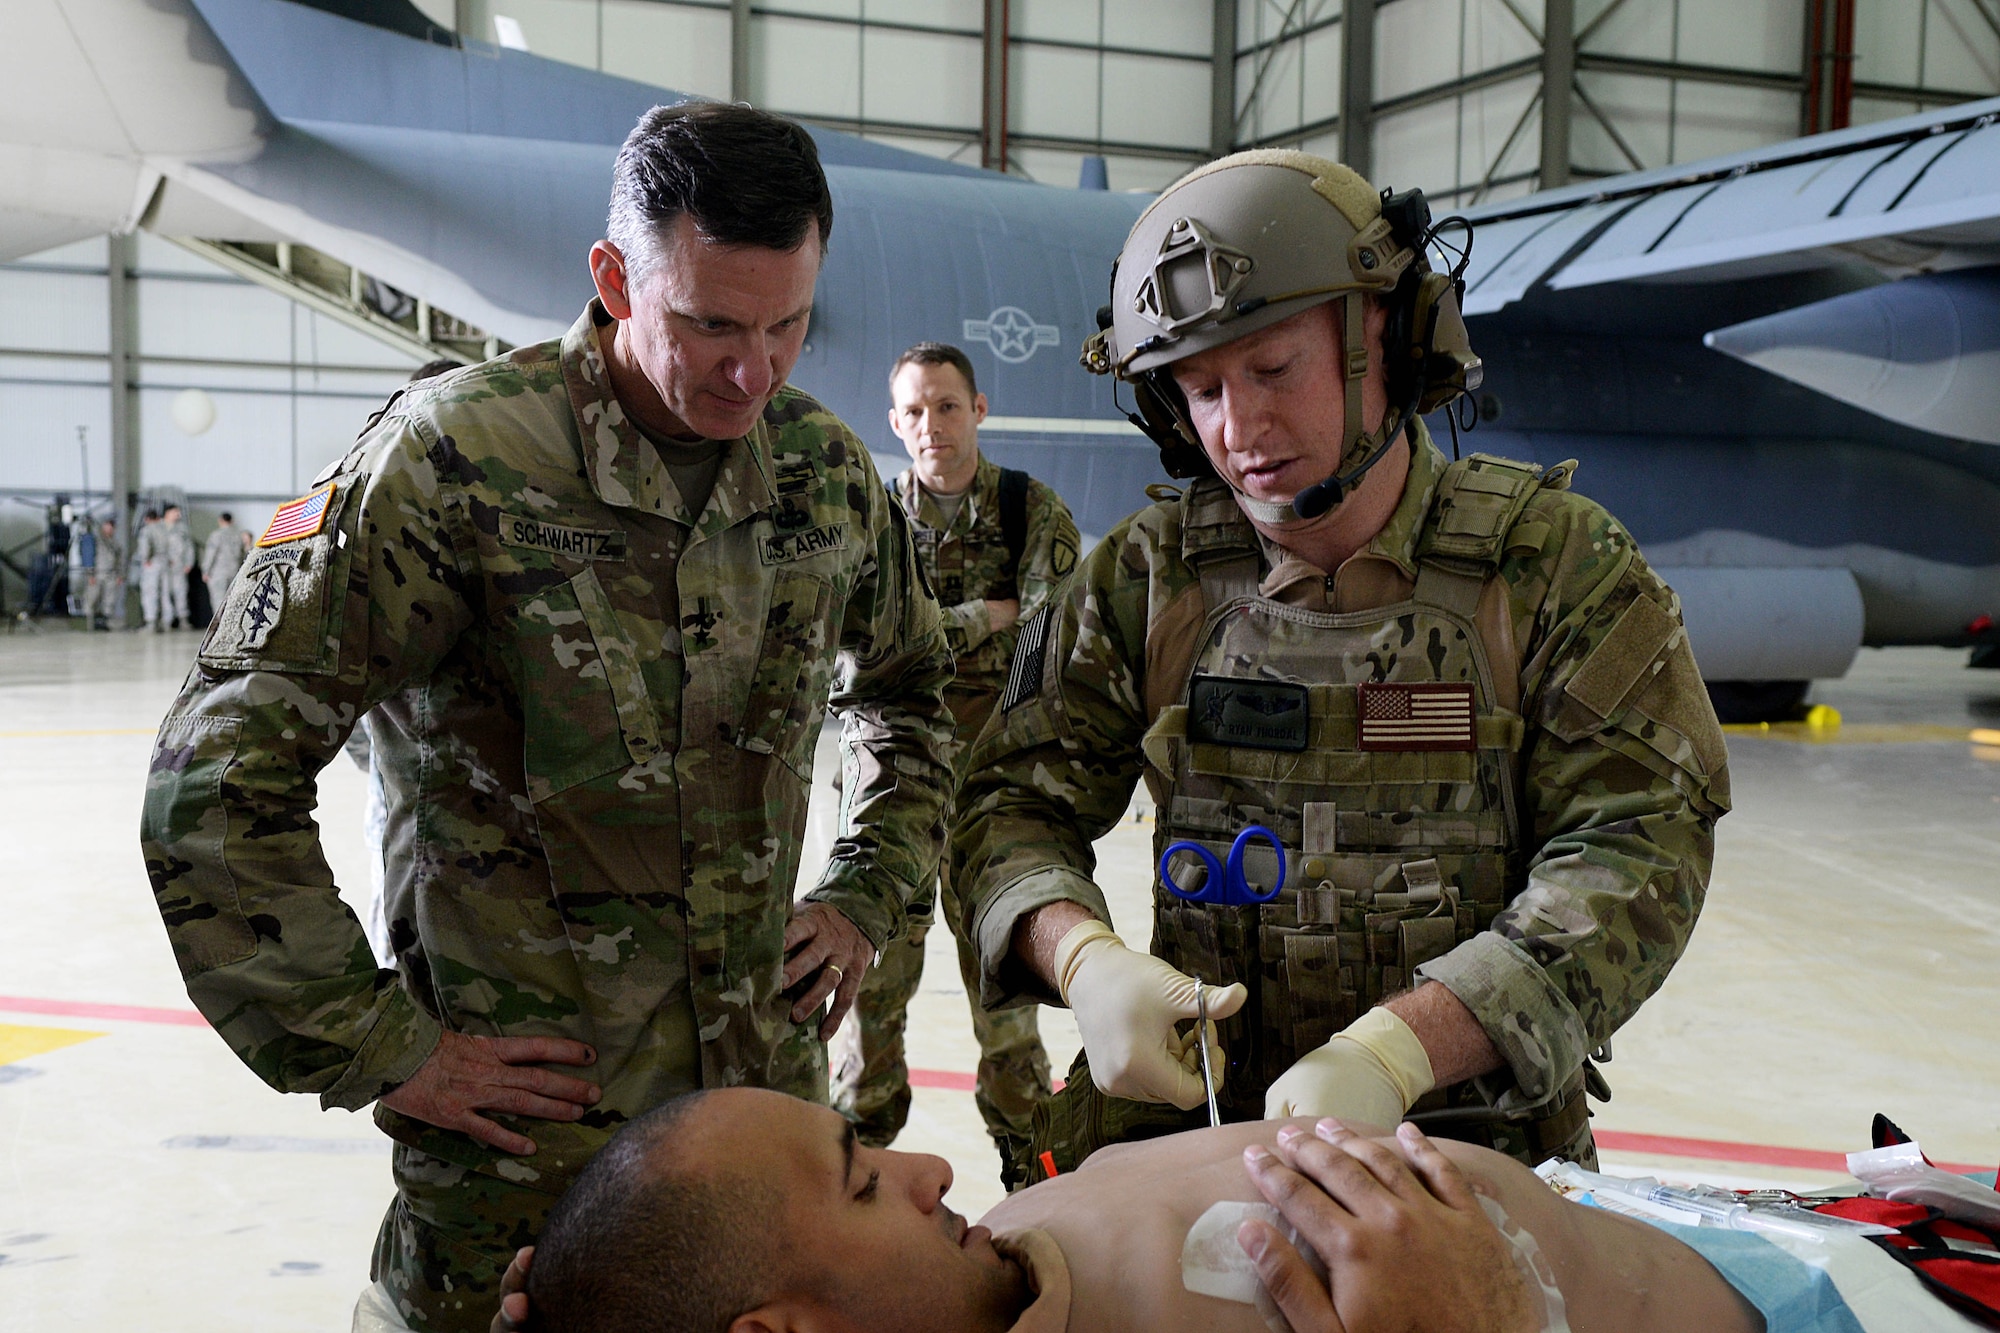 U.S. Army Maj. Gen. Mark C. Schwartz, left, commander of the Special Operations Command-Europe, watches Airmen demonstrate medical procedures during a tour Aug. 1, 2016, on RAF Mildenhall, England. The demonstration was one of many displays presented during the visit. (U.S. Air Force photo by Airman 1st Class Tenley Long)